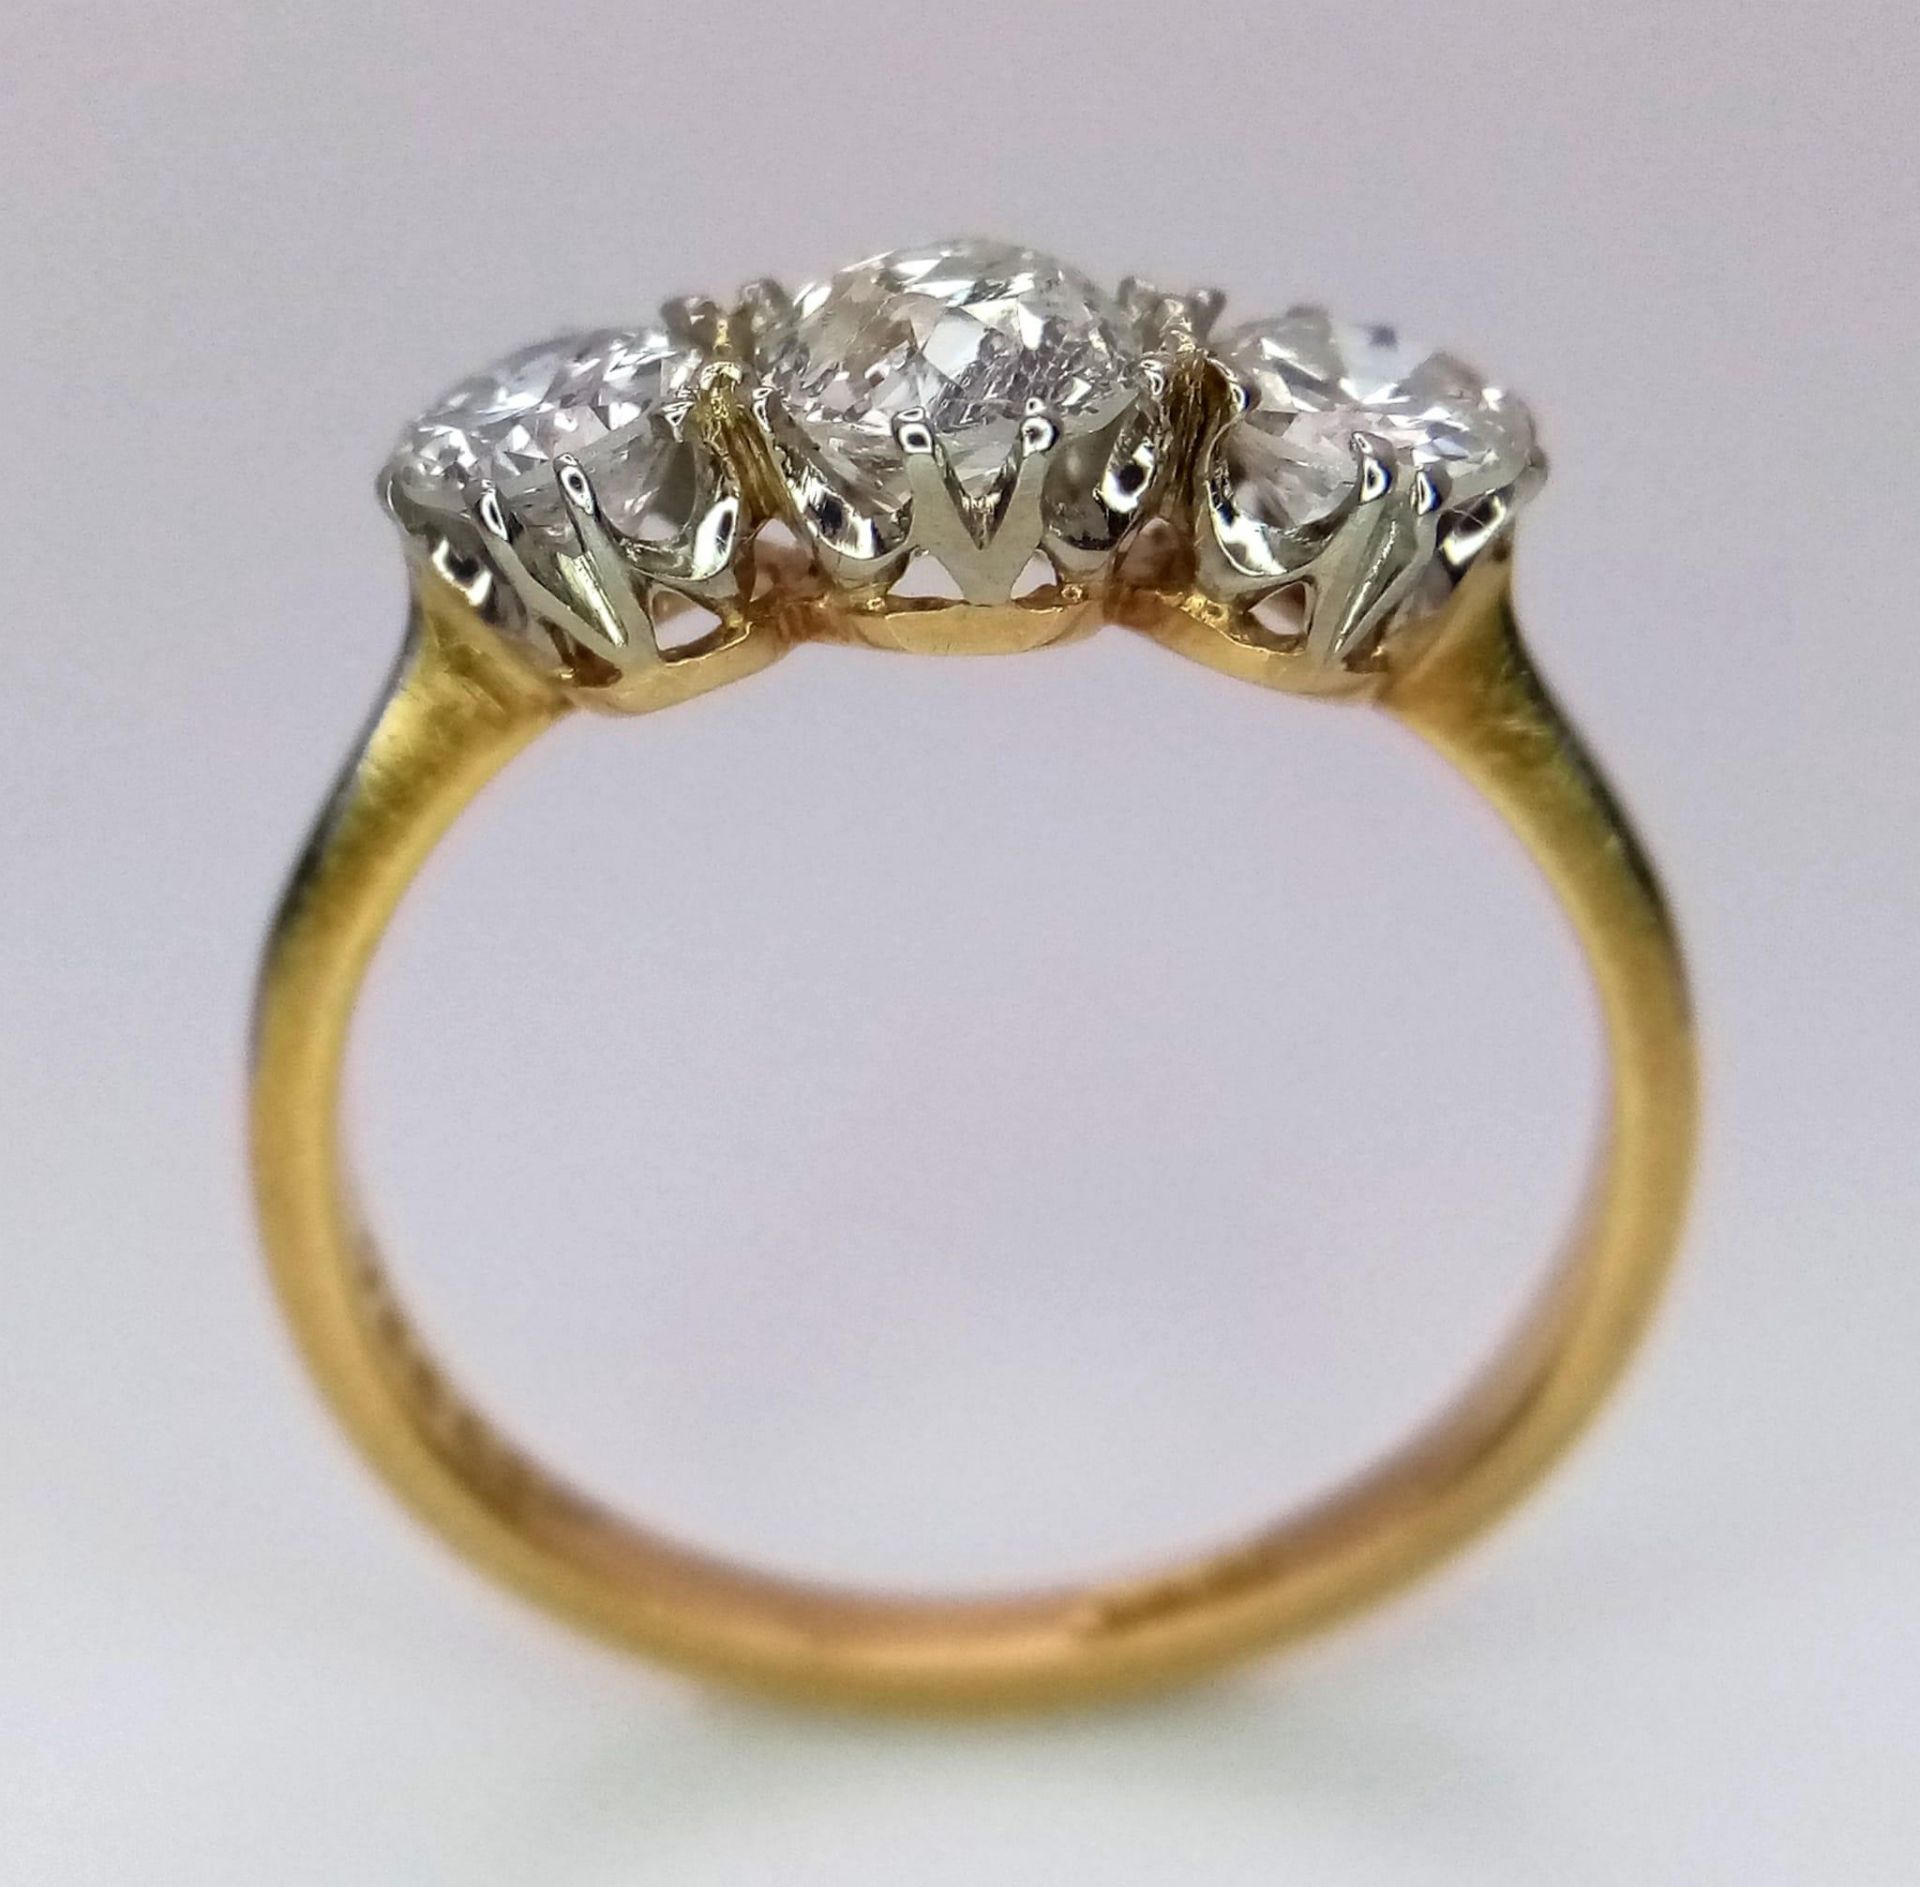 An 18 k yellow gold ring with a trilogy of brilliant round cut diamonds (1 carat min.), ring size: - Image 4 of 6